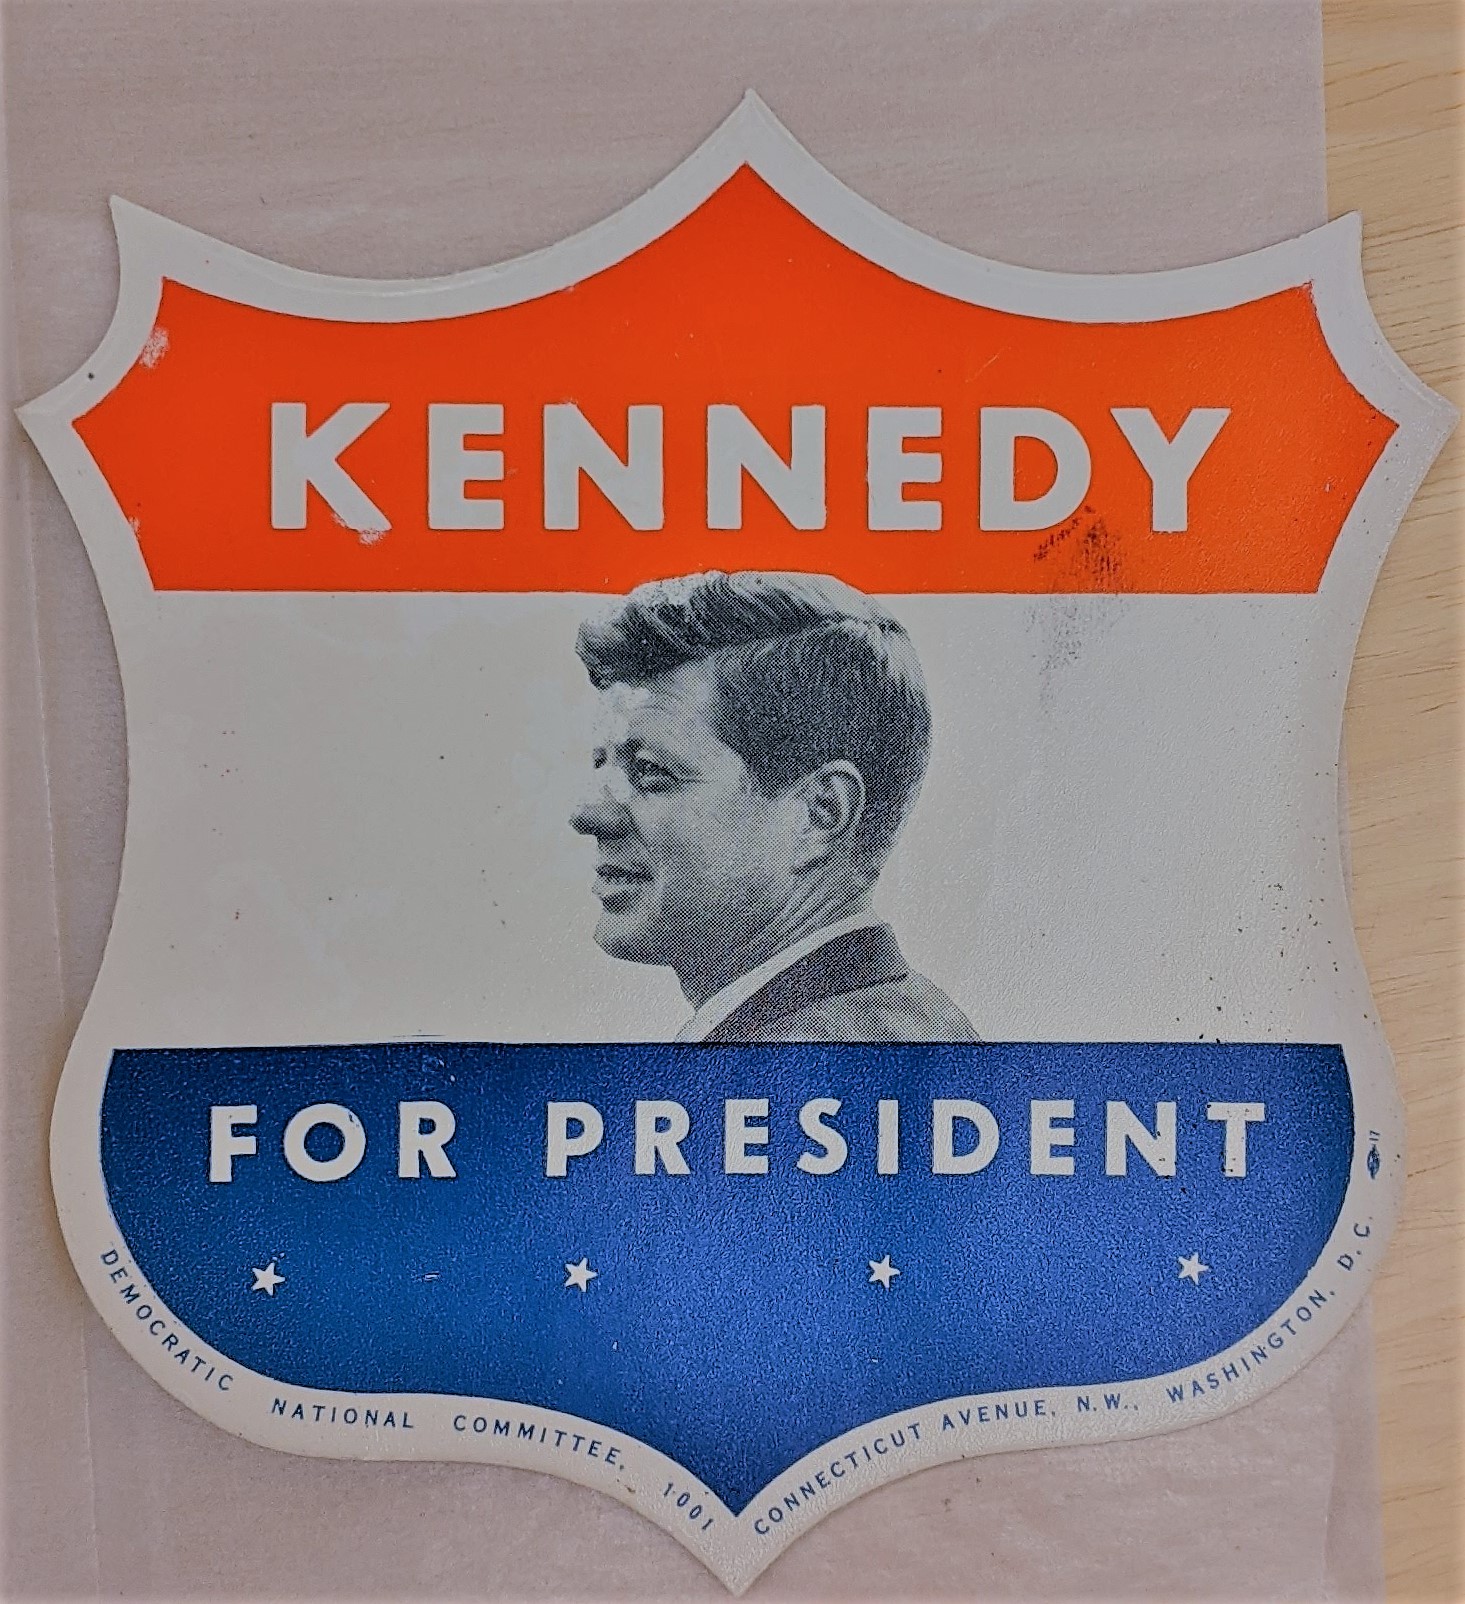 Creator unknown, “Kennedy for President” bumper sticker, 1960, from the Jerome O. Herlihy political campaign ephemera collection